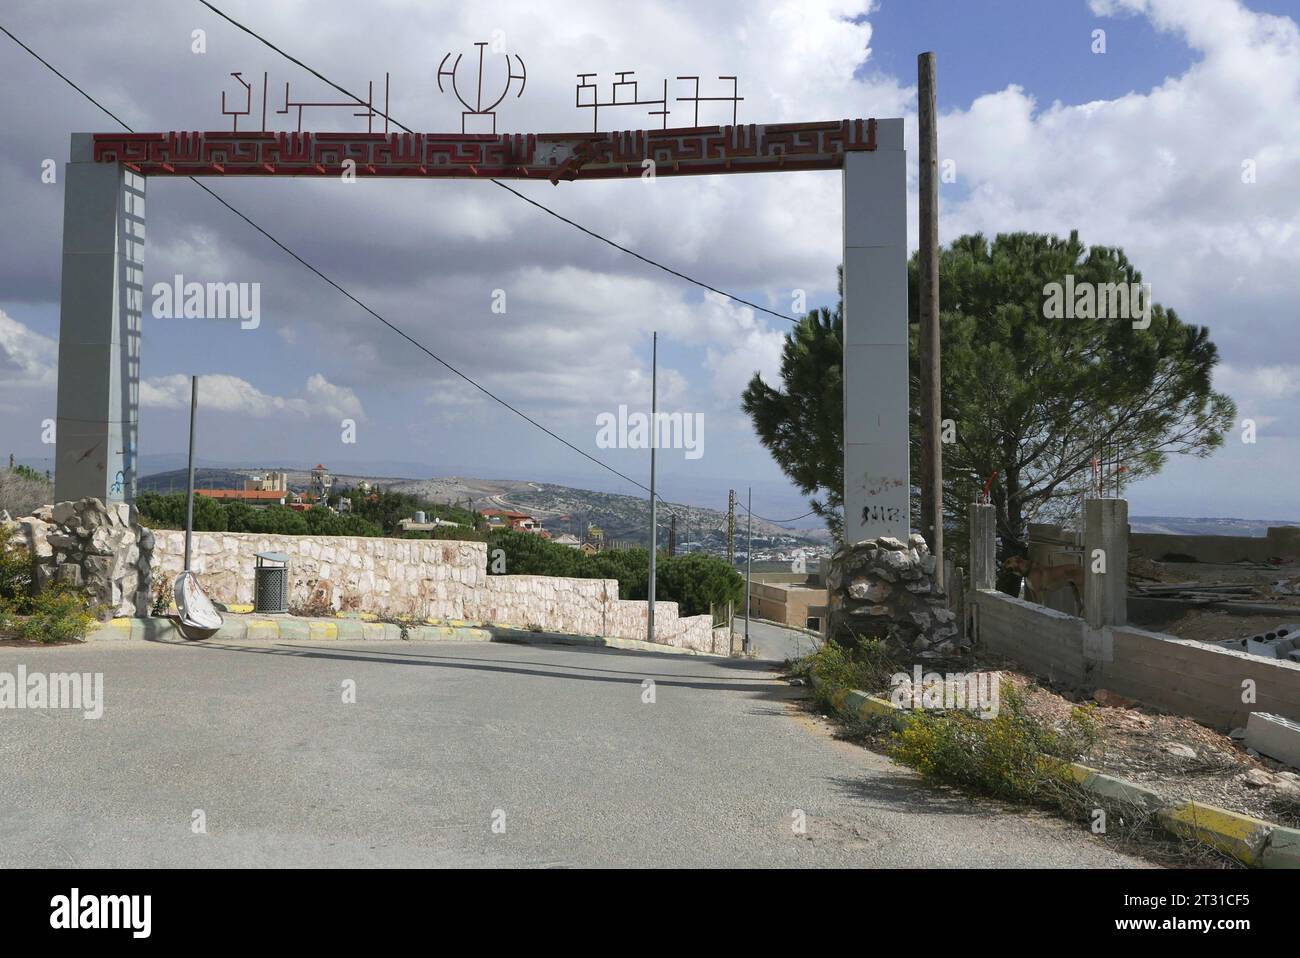 The entrance of Iran Garden, Maroun al Ras, Lebanon, October 20 2023. Maroun Al Ras, a Hezbollah stronghold atop a hill one kilometer from the border, was the scene of many fights on last days. Reportedly, 5 Hezbollah fighters have been killed by by an Israeli airstrike on October 17; the night after, the statue of Iranian military officer Qasem Soleimani was targeted and destroyed by IDF in the park known as 'Iran Garden', a symbol of Iranian influence in the region. The actual border between the two countries is the white wall in the middle of the pic, called by UN 'the blue line'. (Photo Stock Photo